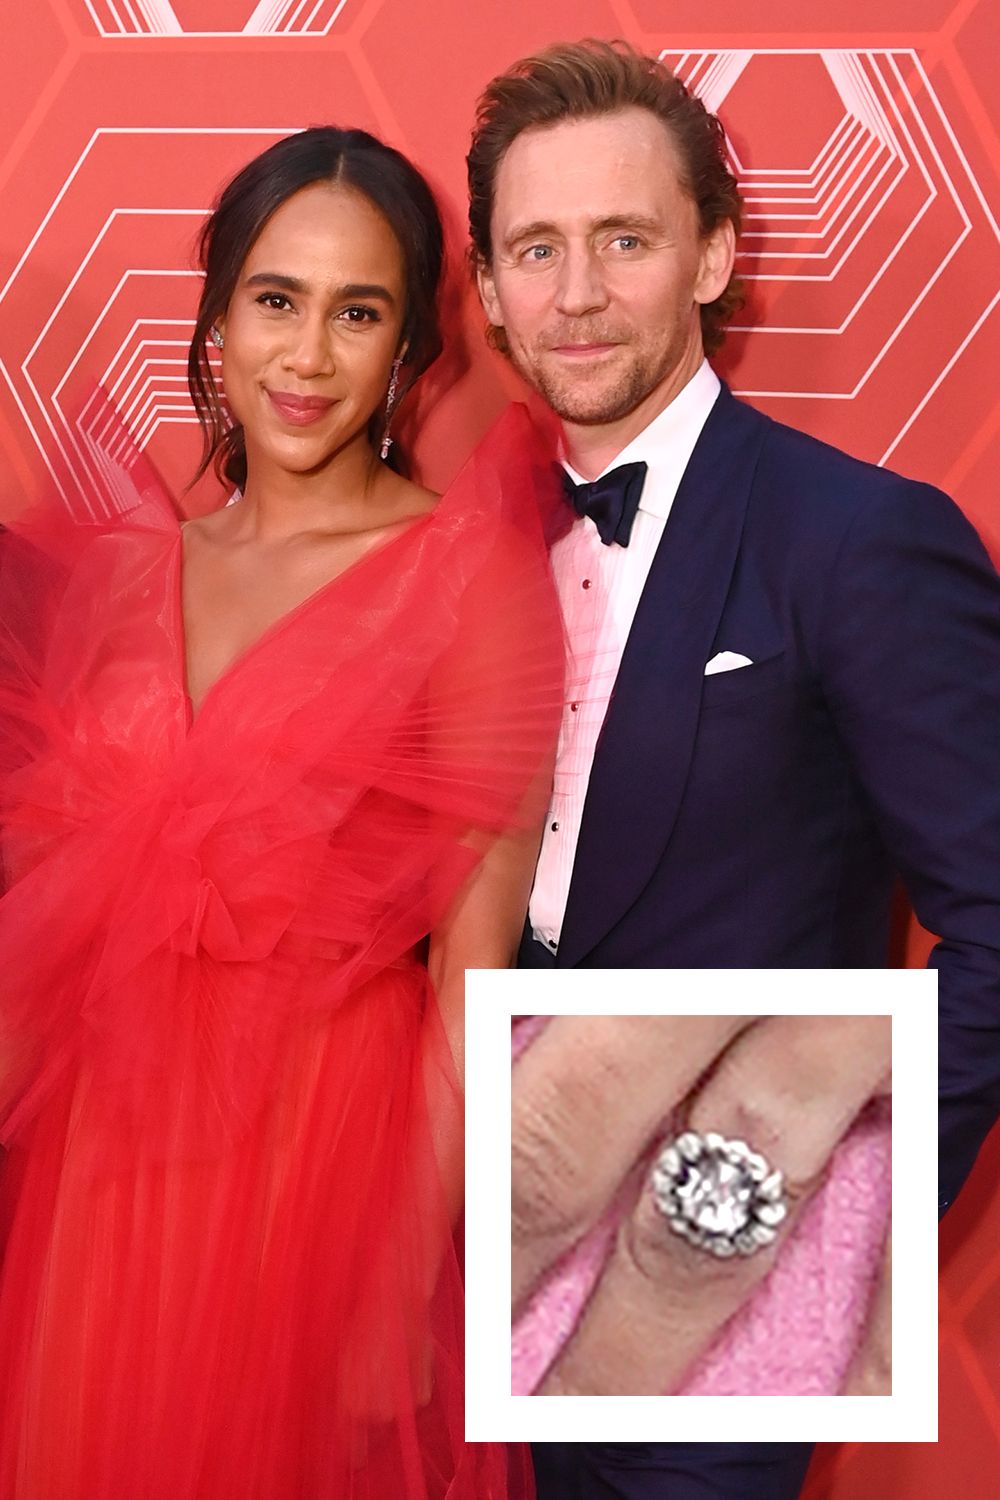 The 5 Most Expensive Celebrity Engagement Rings – JohnstonJewelers